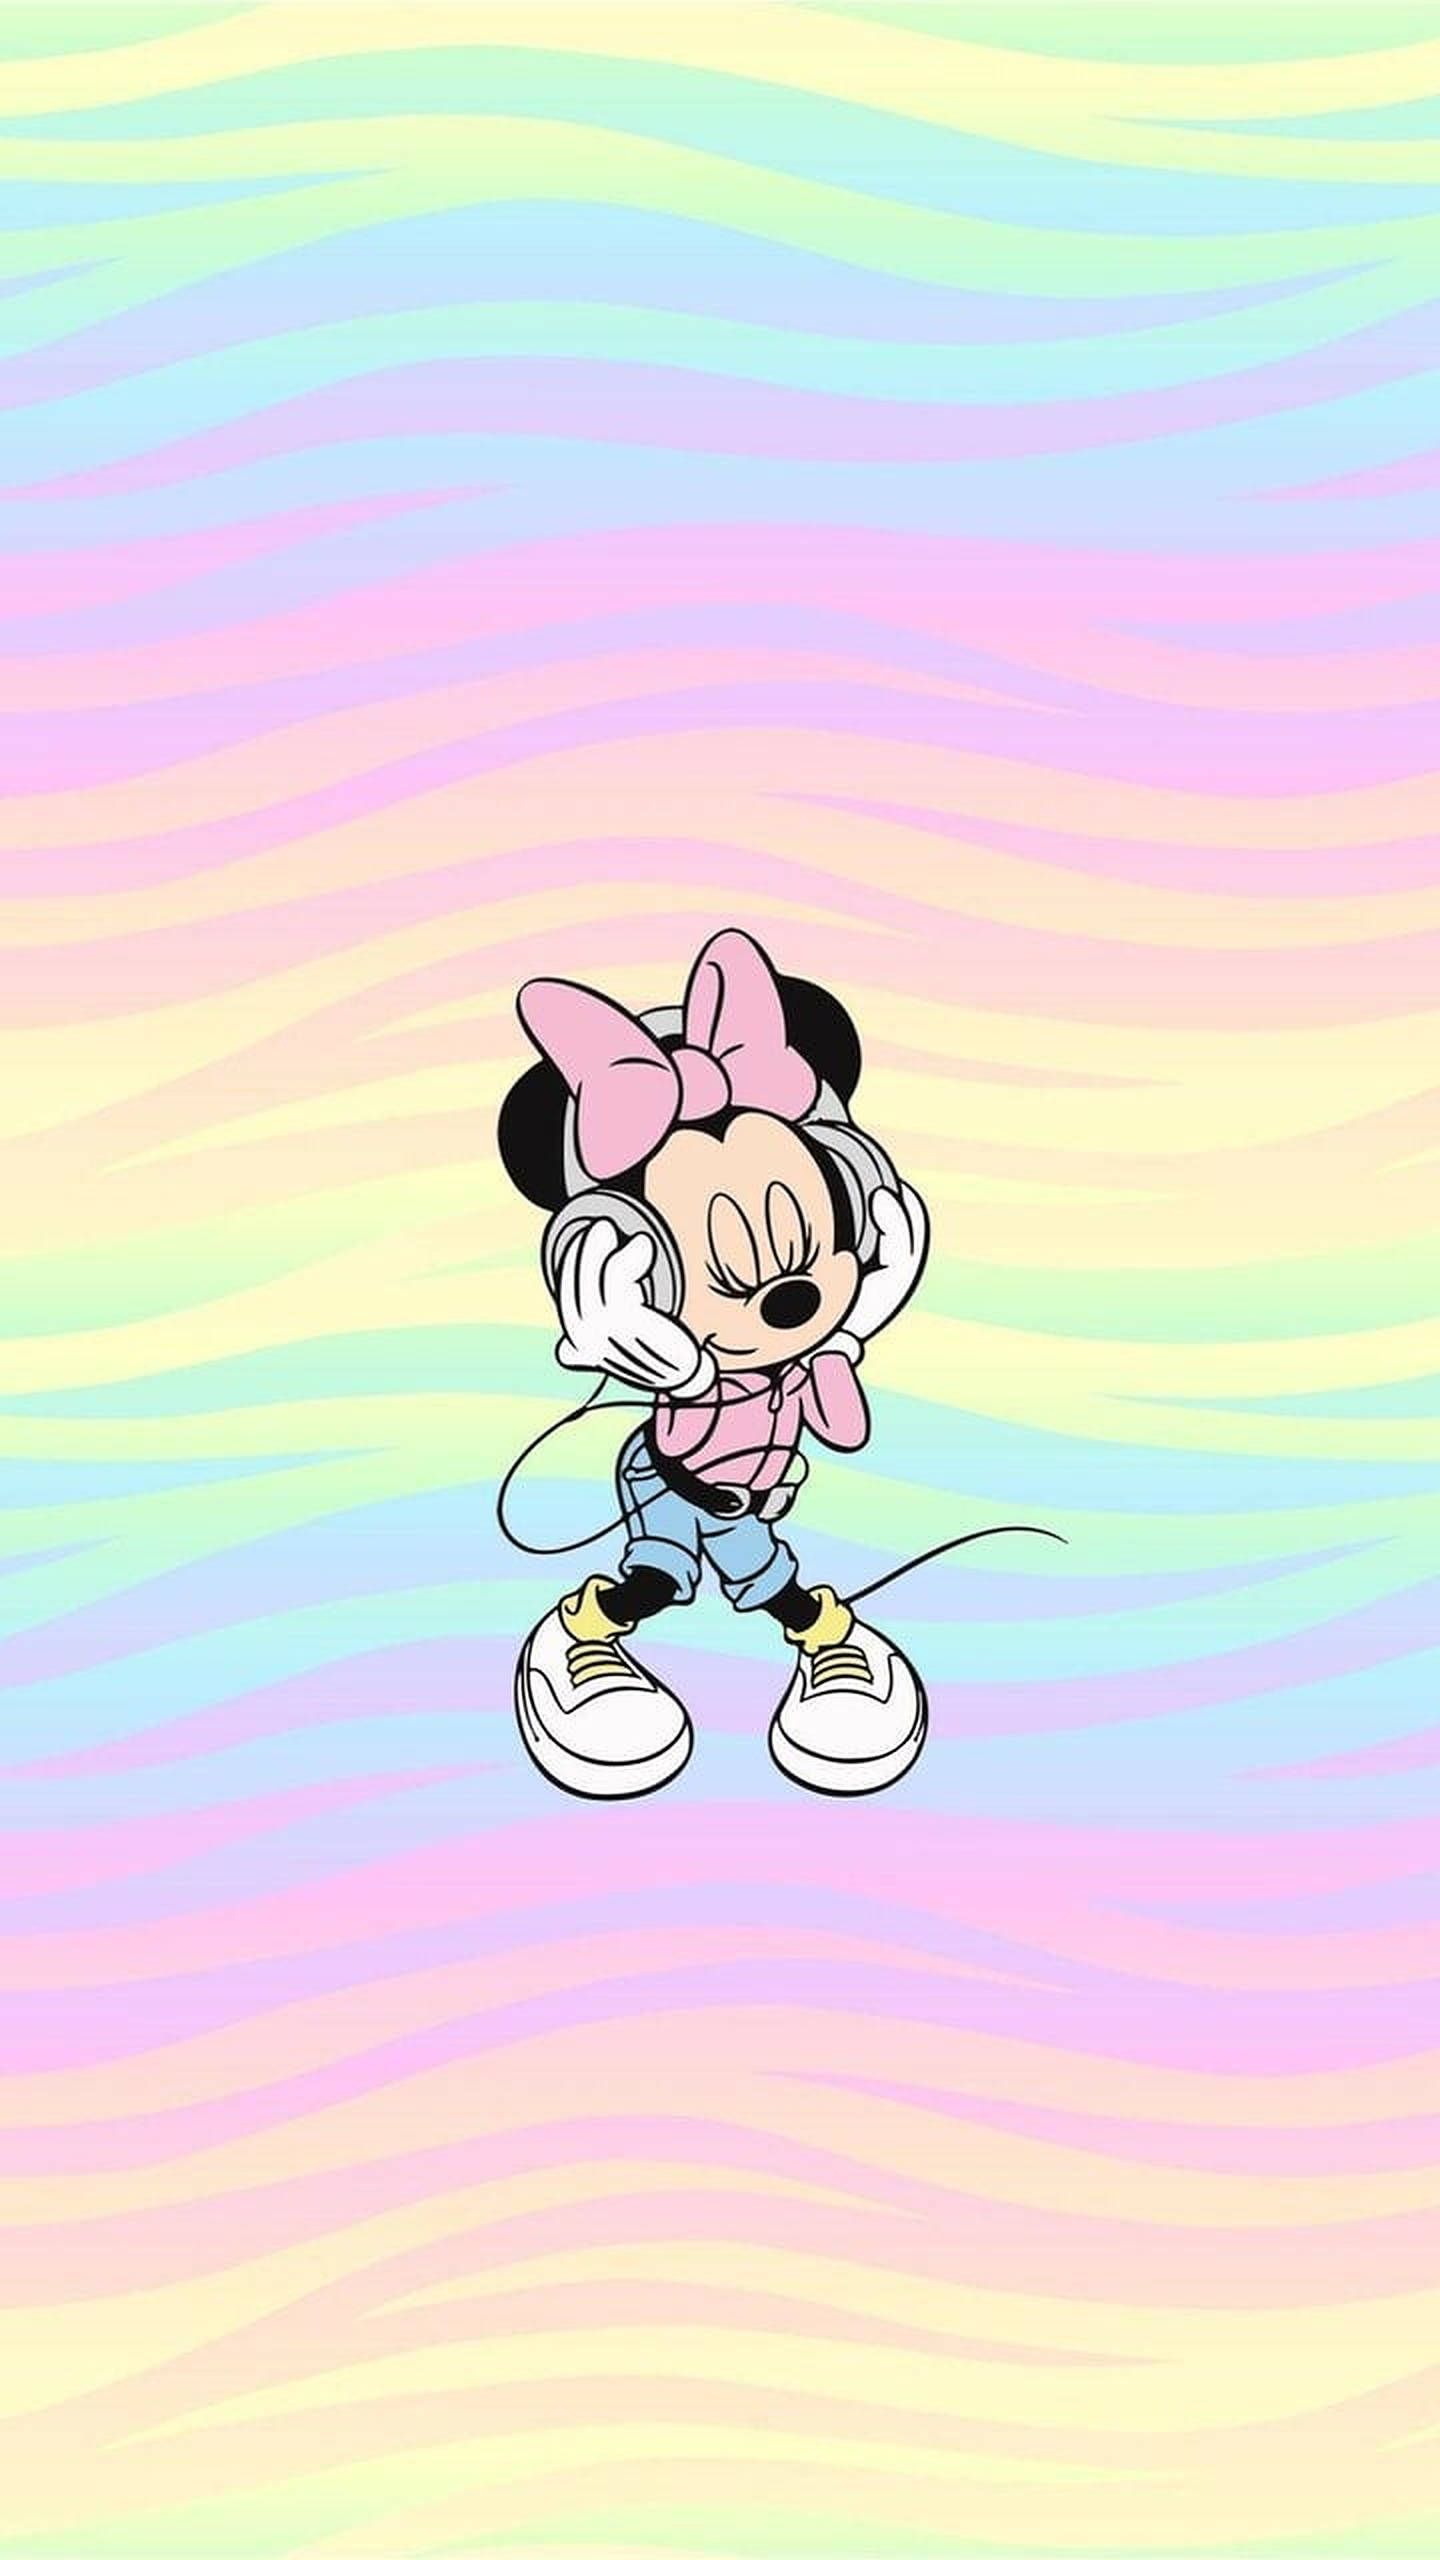 Aesthetic Minnie Mouse wallpaper for your phone or desktop background. - Minnie Mouse